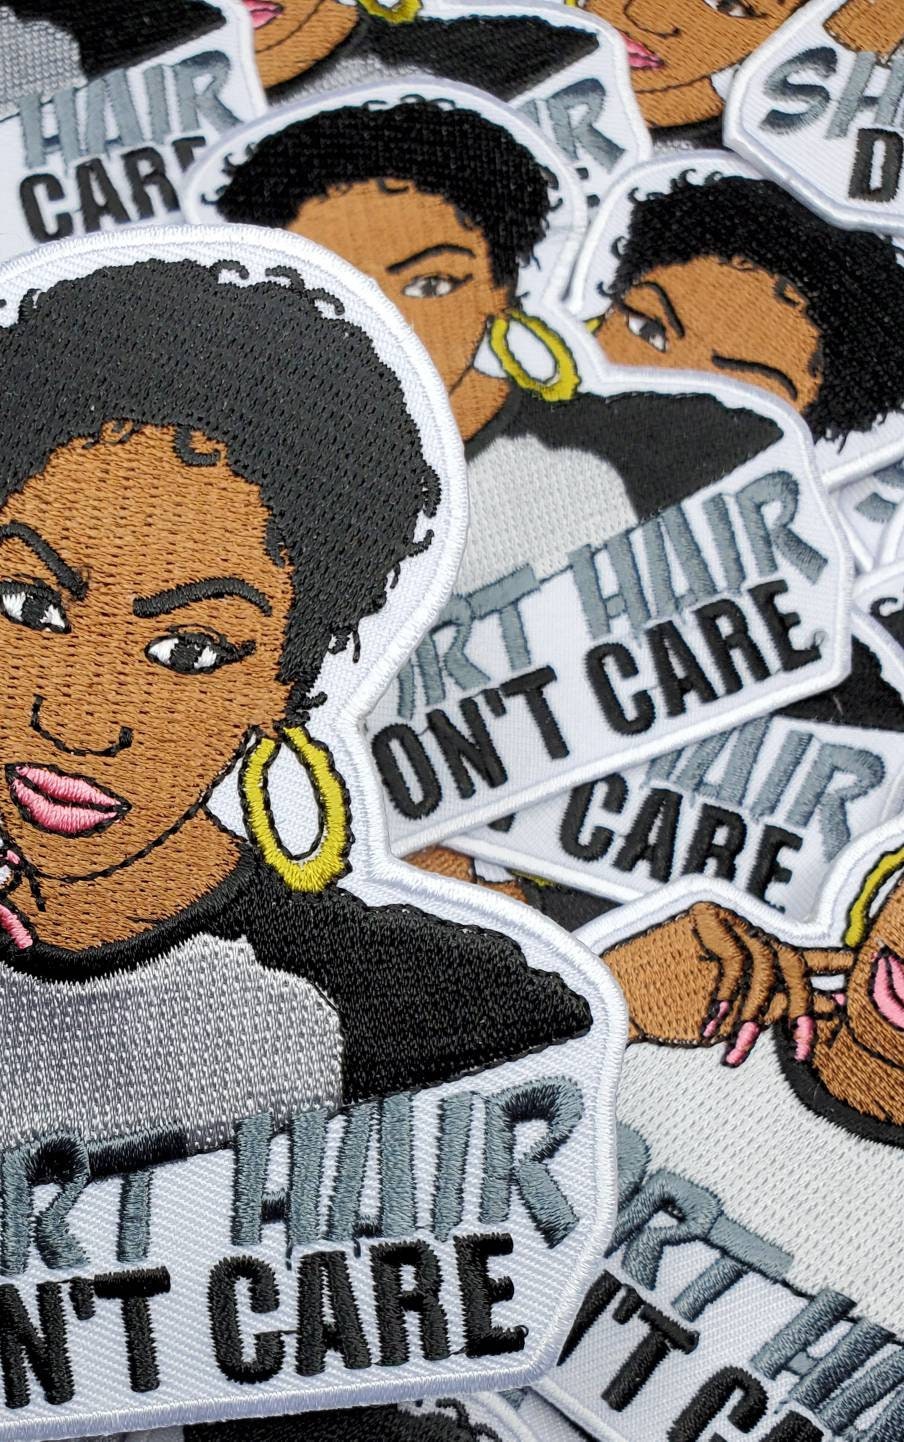 Iron-on Patch "Short Hair, Don't Care" Size 4" Embroidery Patch; Black Girl Magic with Gold Hoops; Patch for Jackets and Accessories